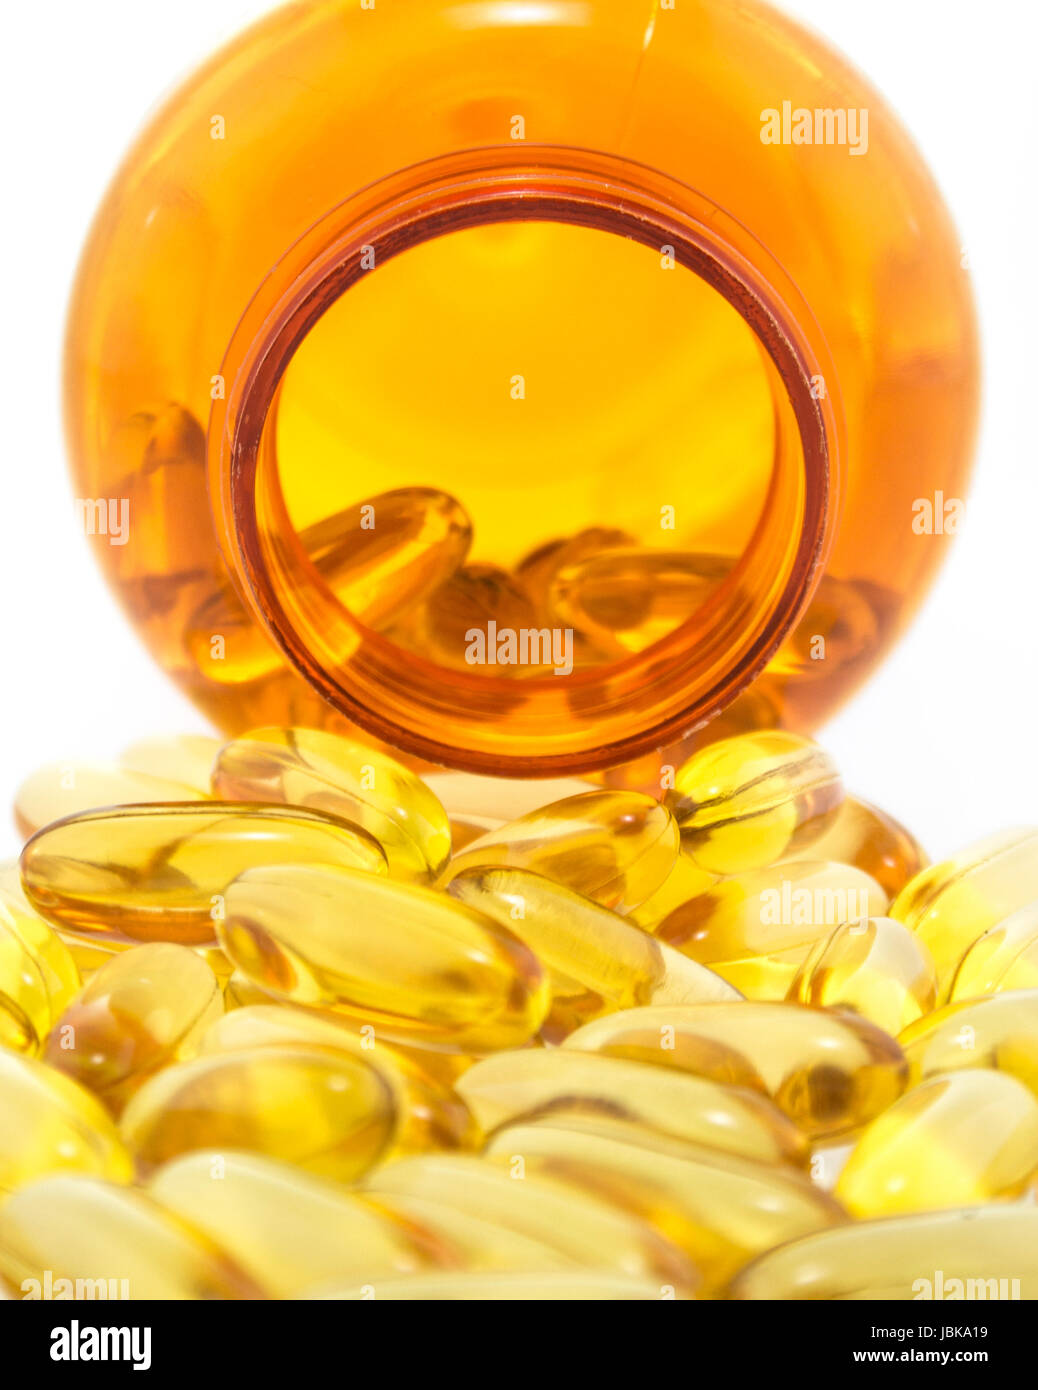 Cod liver oil omega 3 gel capsules isolated on white background Stock Photo